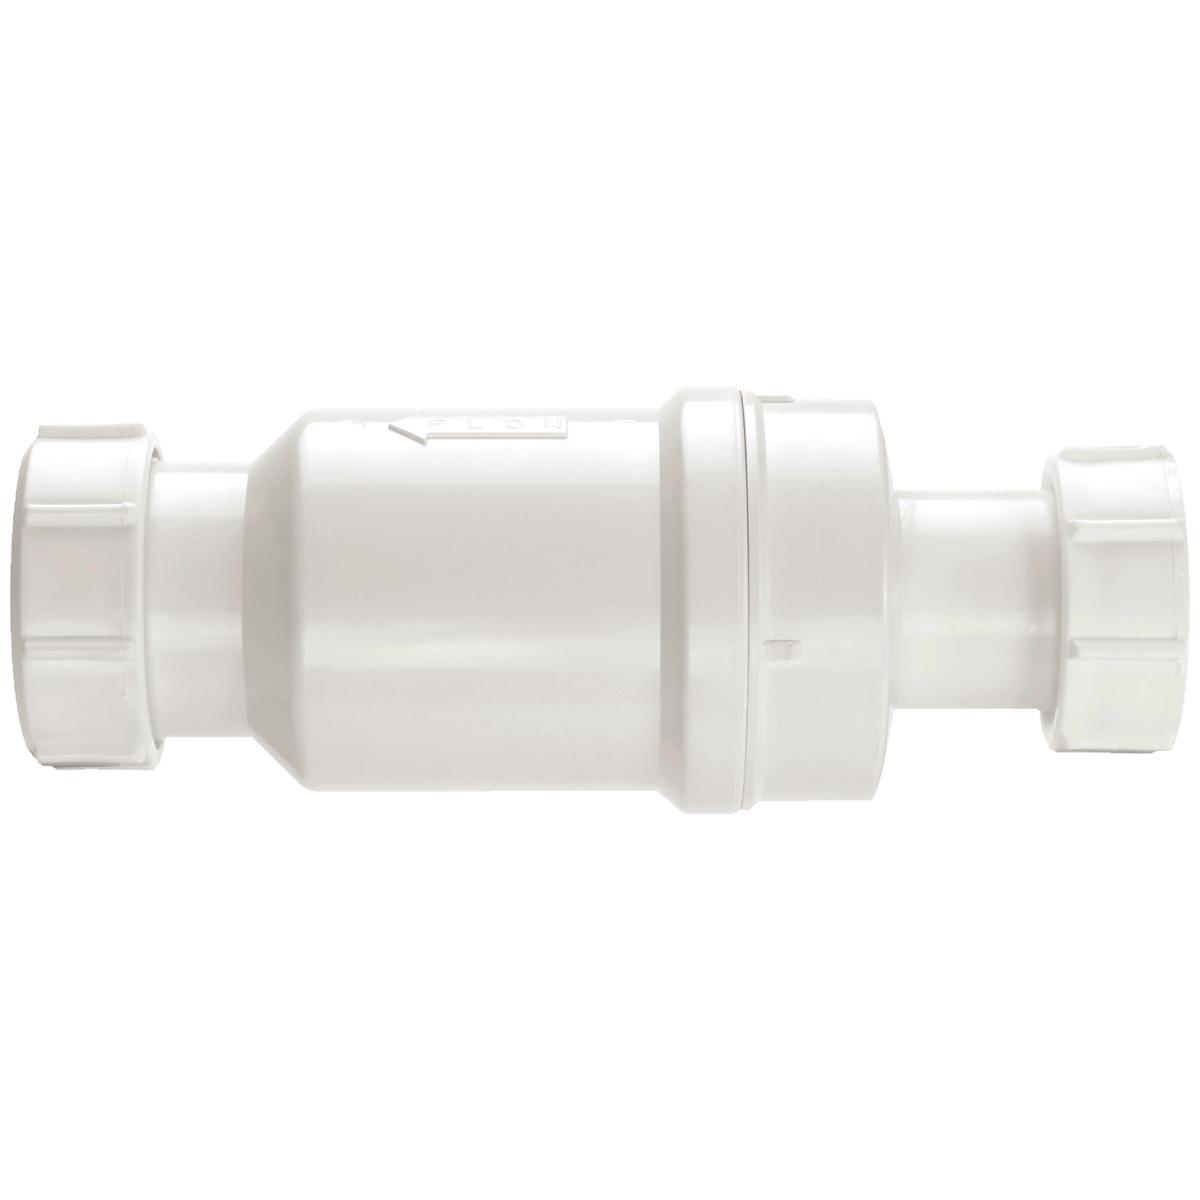 MACVALVE-2 40MM BSP INLET-COMP OUTLET